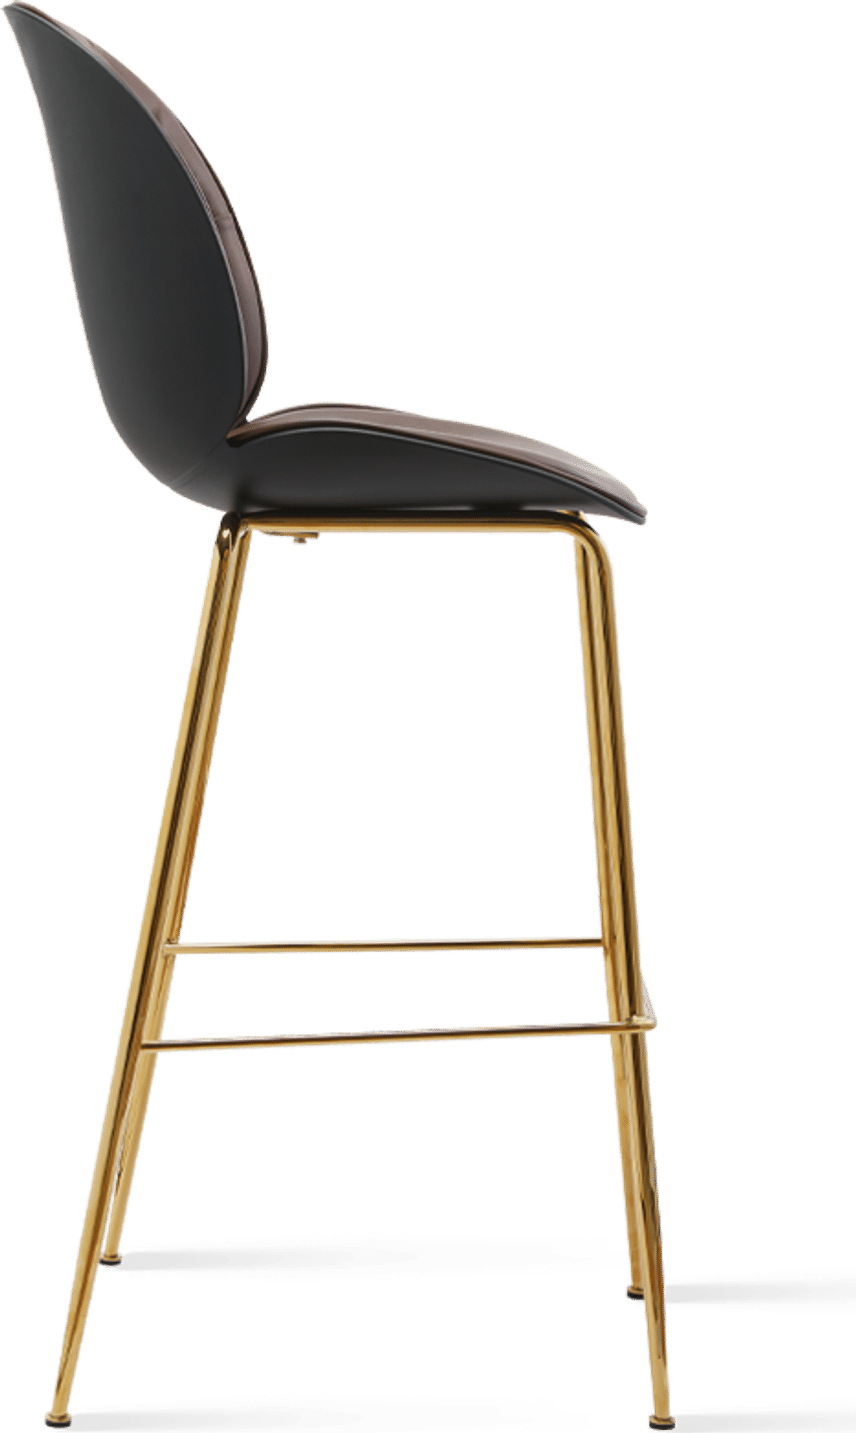 Beetle Style Barstool - Antique Brown Antique Brown/Gold image.